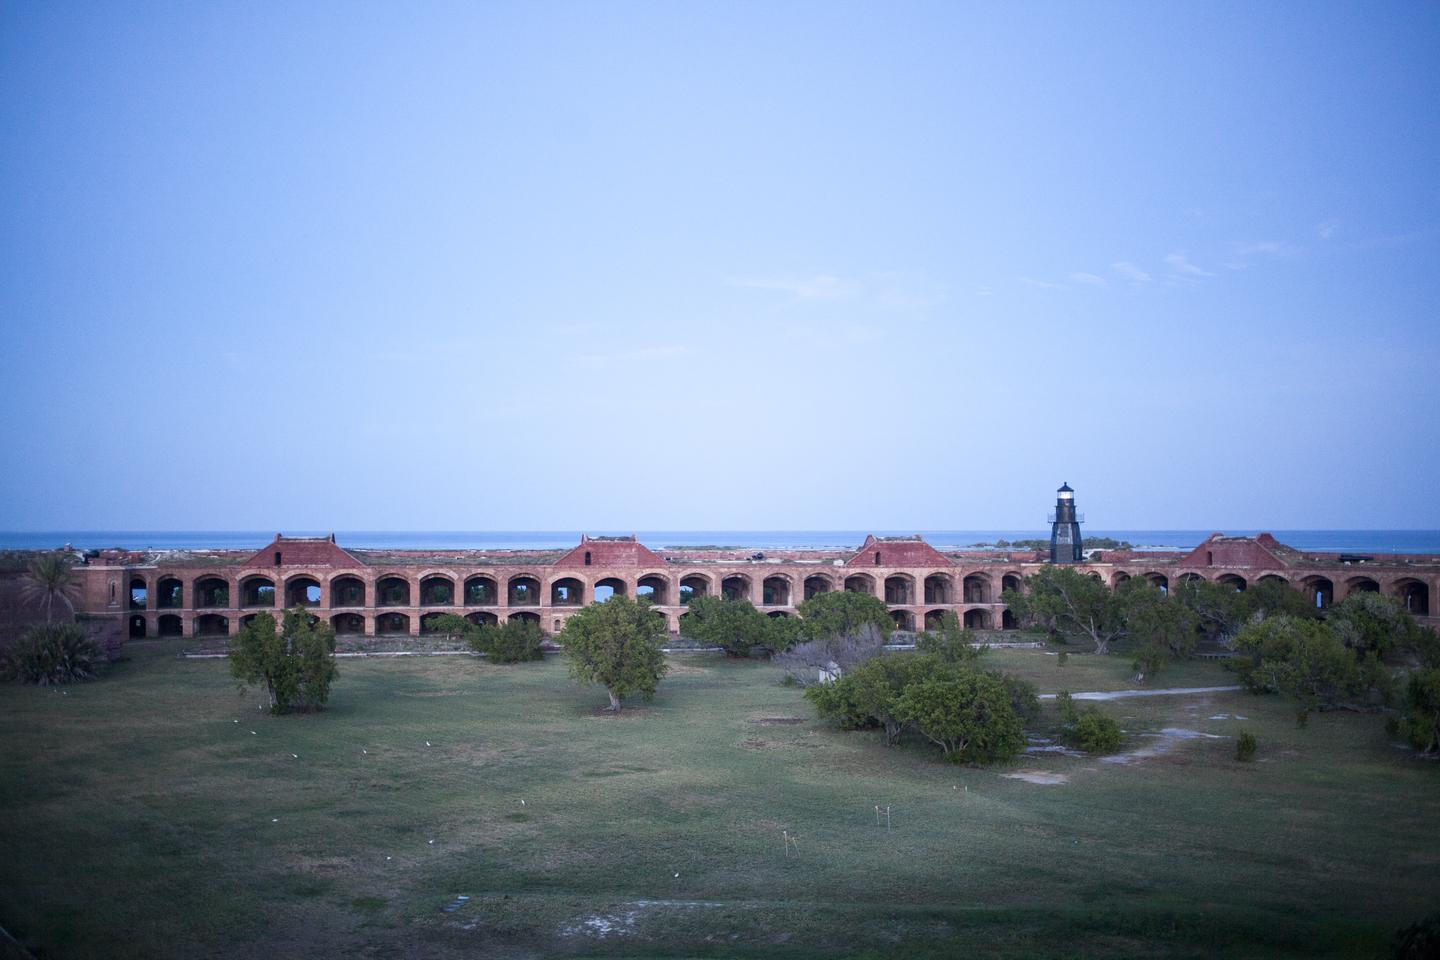 Inside Fort JeffersonGarden Key is the second largest island in the Dry Tortugas, about 14 acres in size, and has had the most human impact. Located on Garden Key is historic Fort Jefferson, one of the nation’s largest 19th century forts and a central cultural feature of Dry